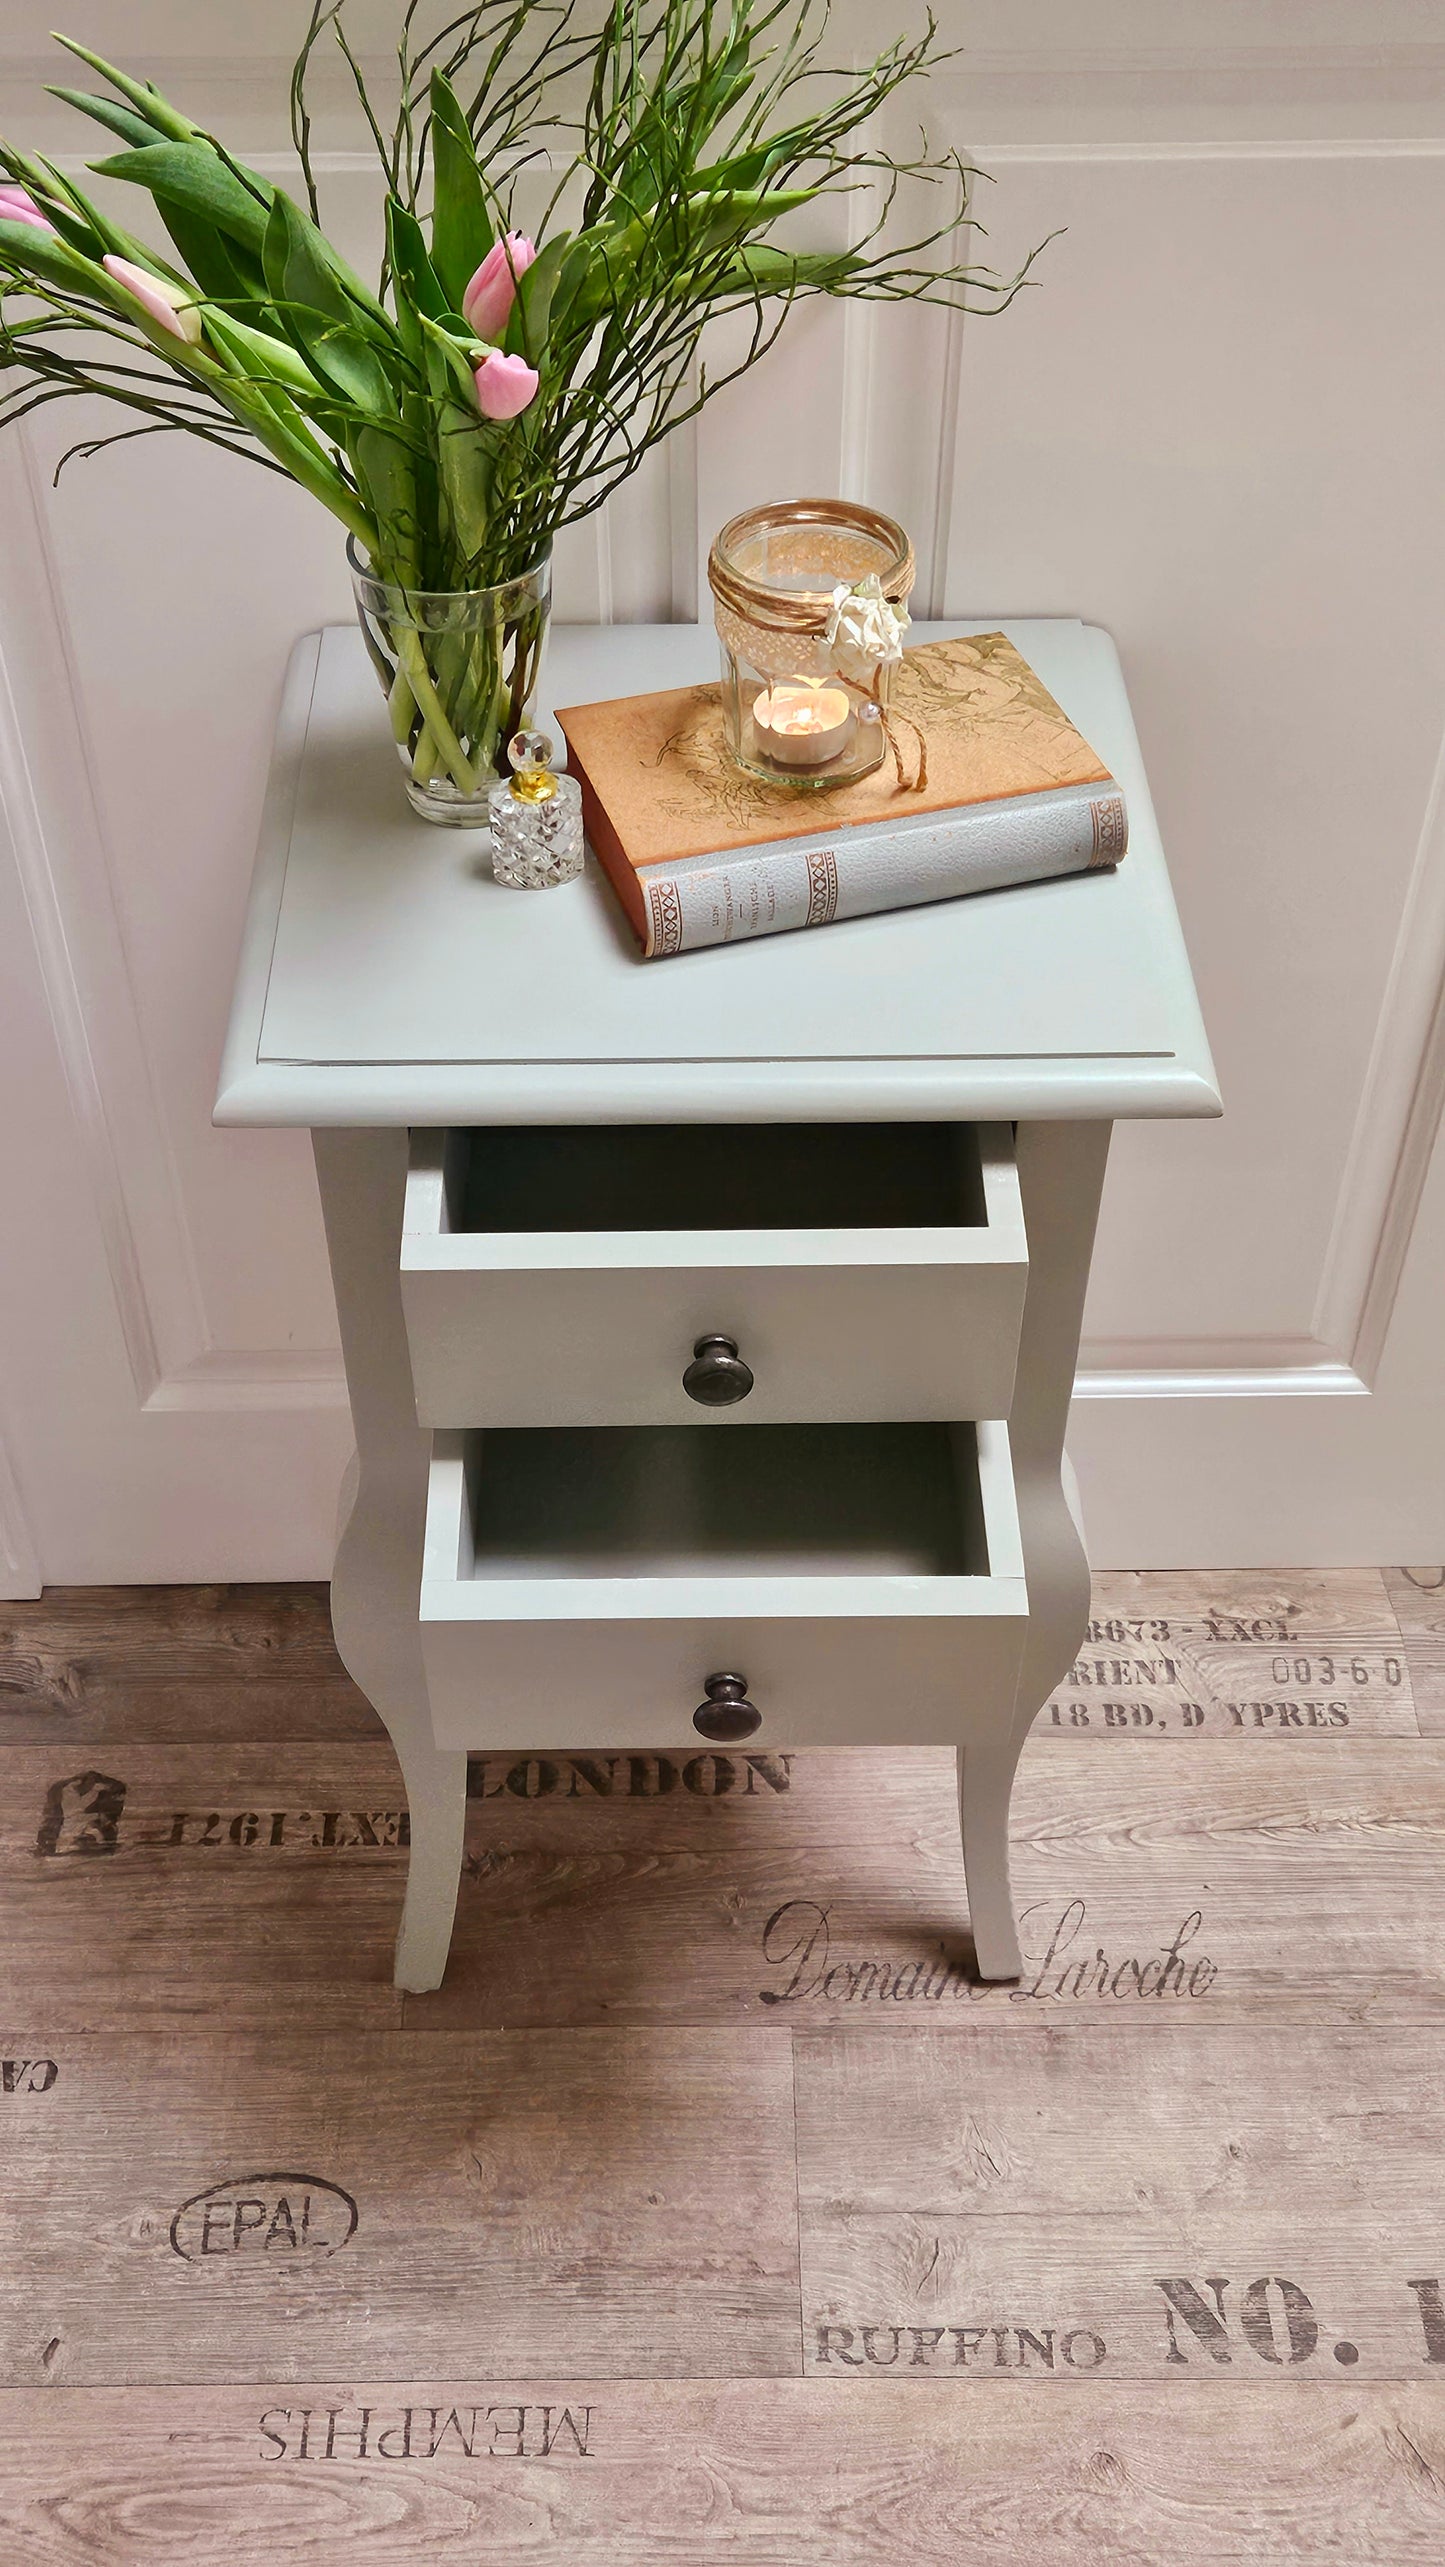 "Nuit" - Country house bedside table solid wood mint